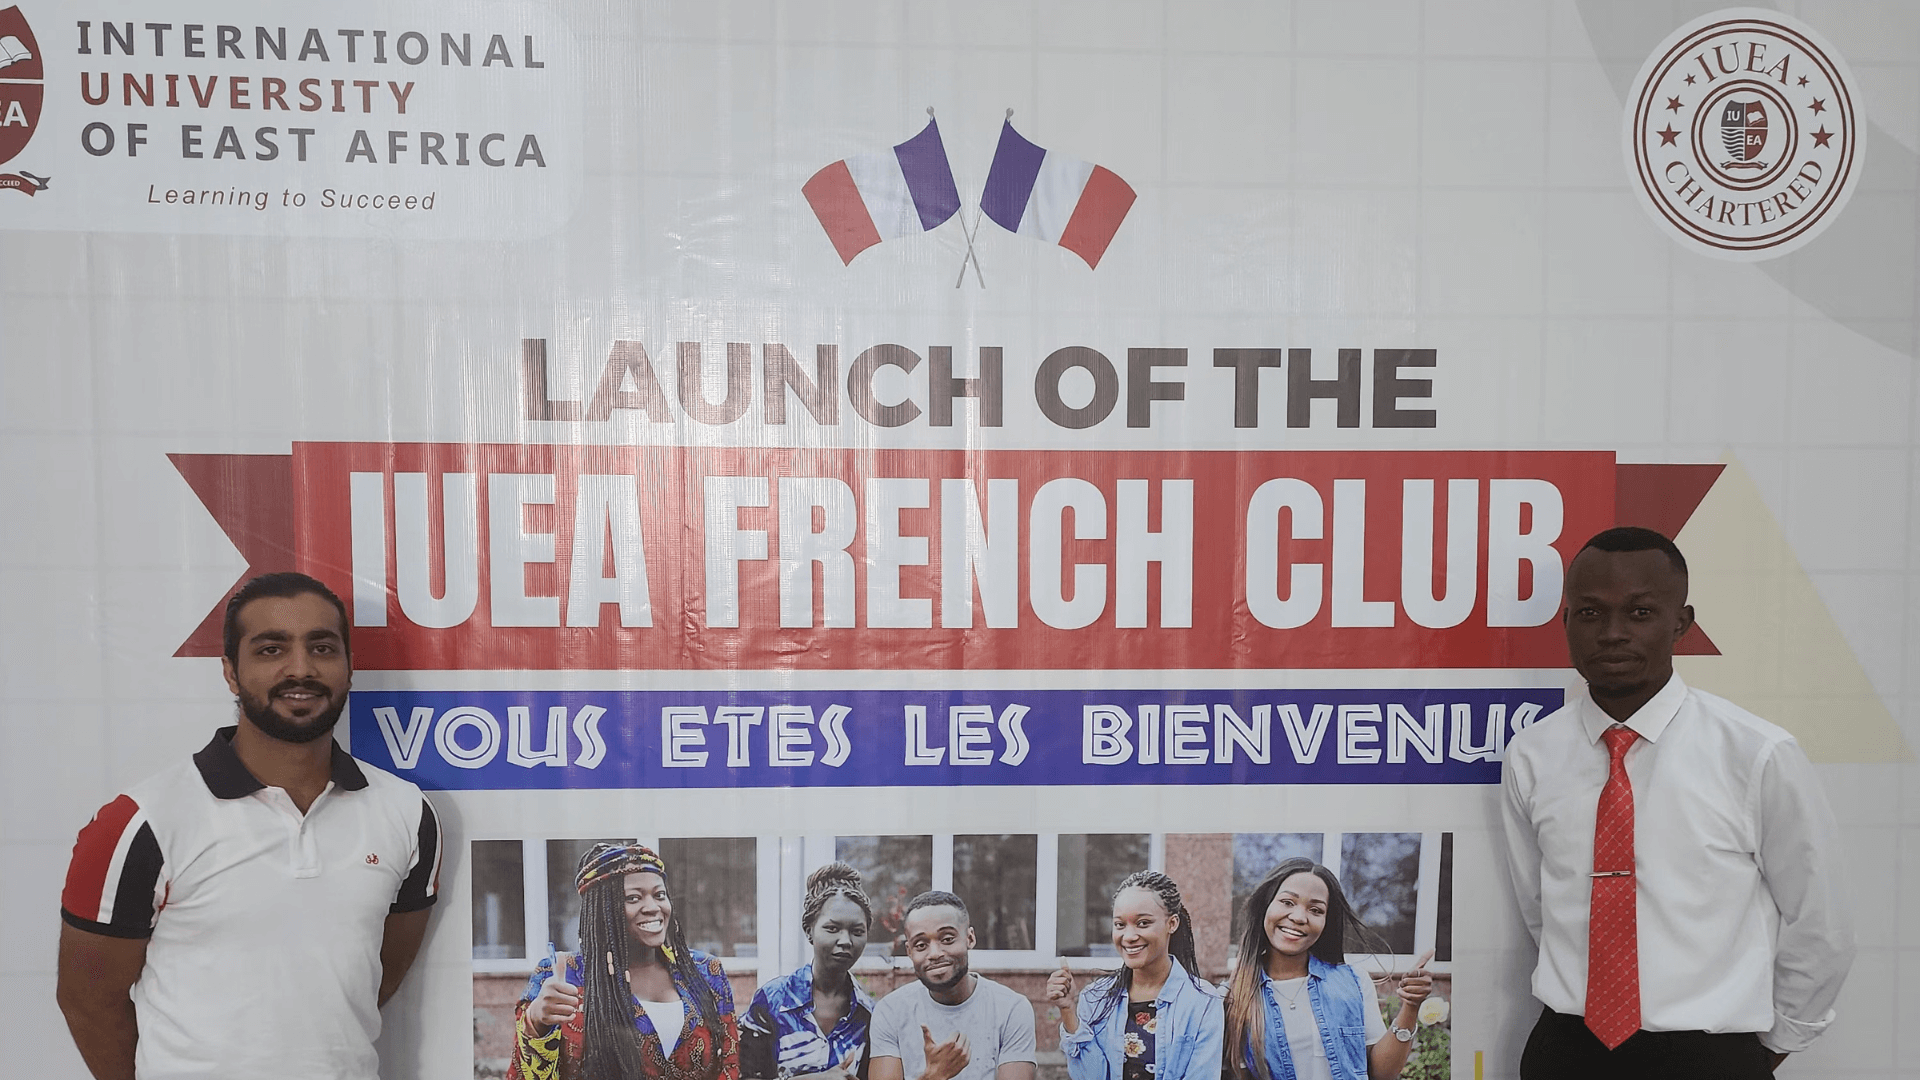 The International University of East Africa Launches its French Club.